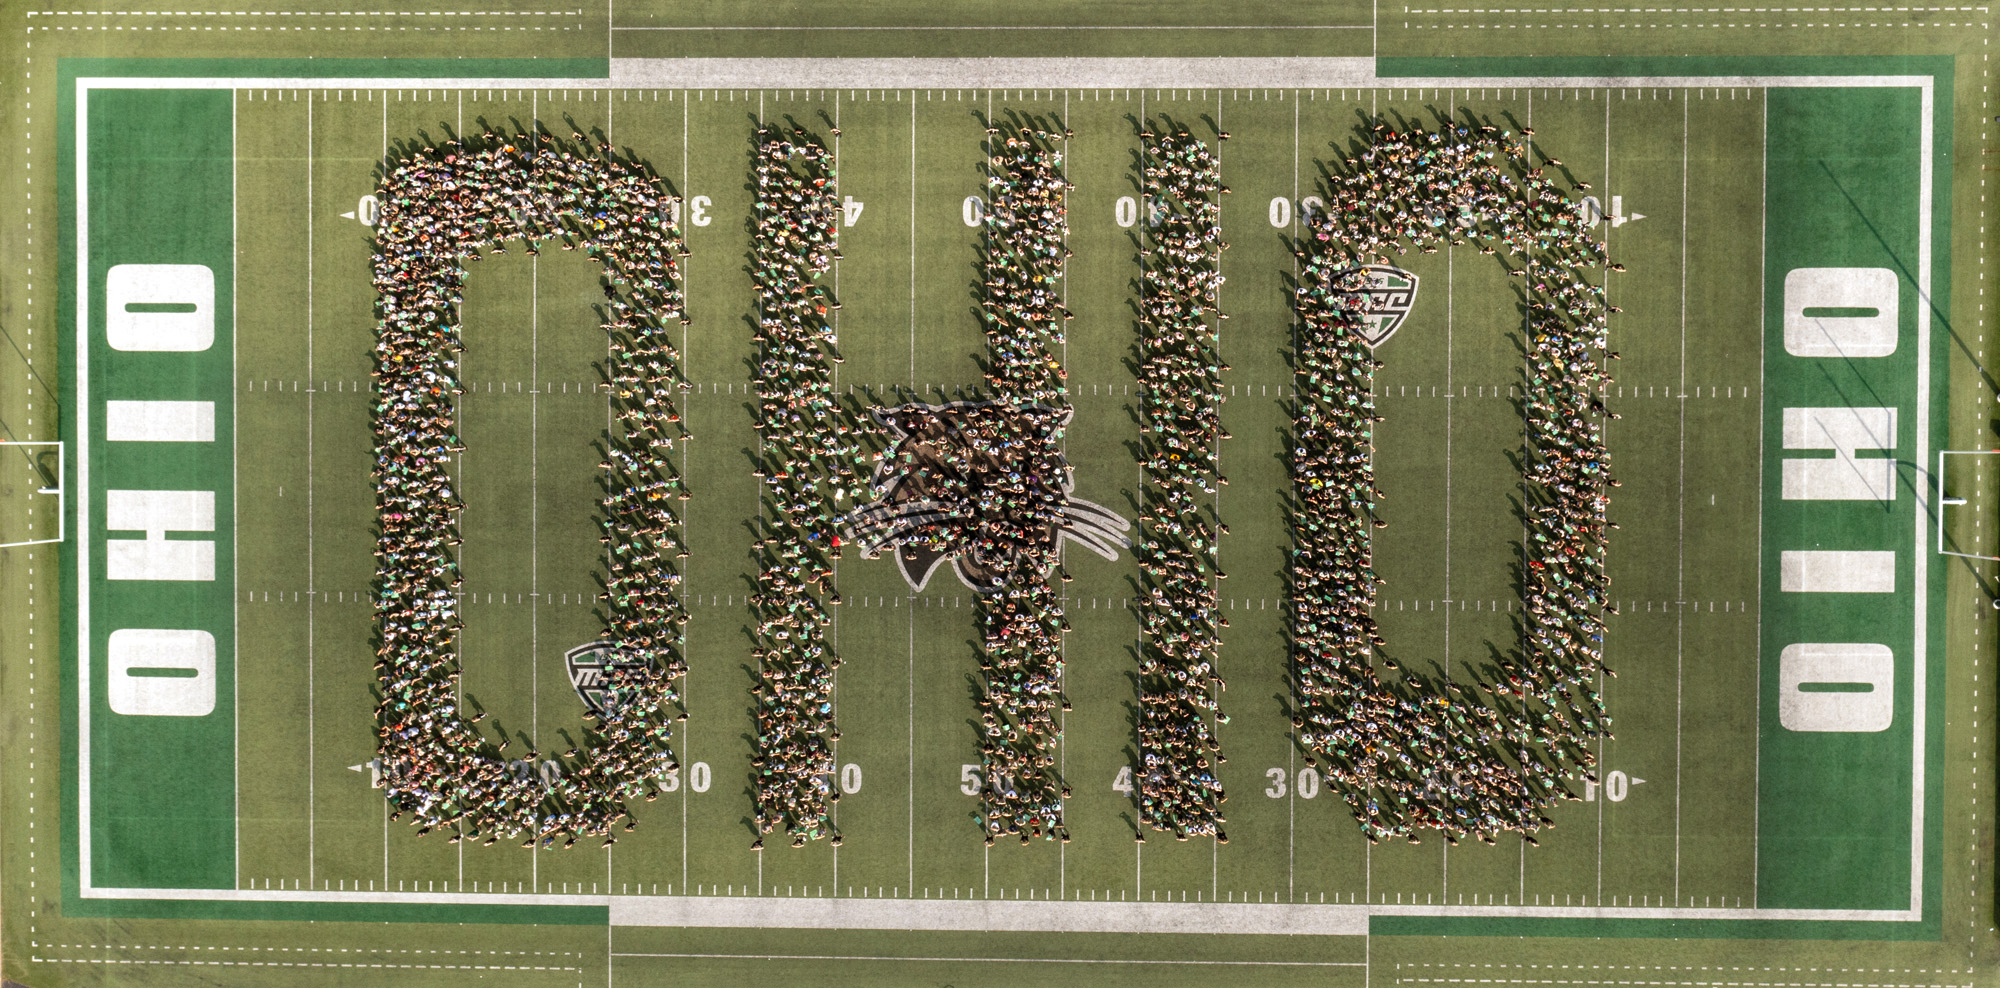 The class of 2025 organized in the shape of OHIO as seen from a drone